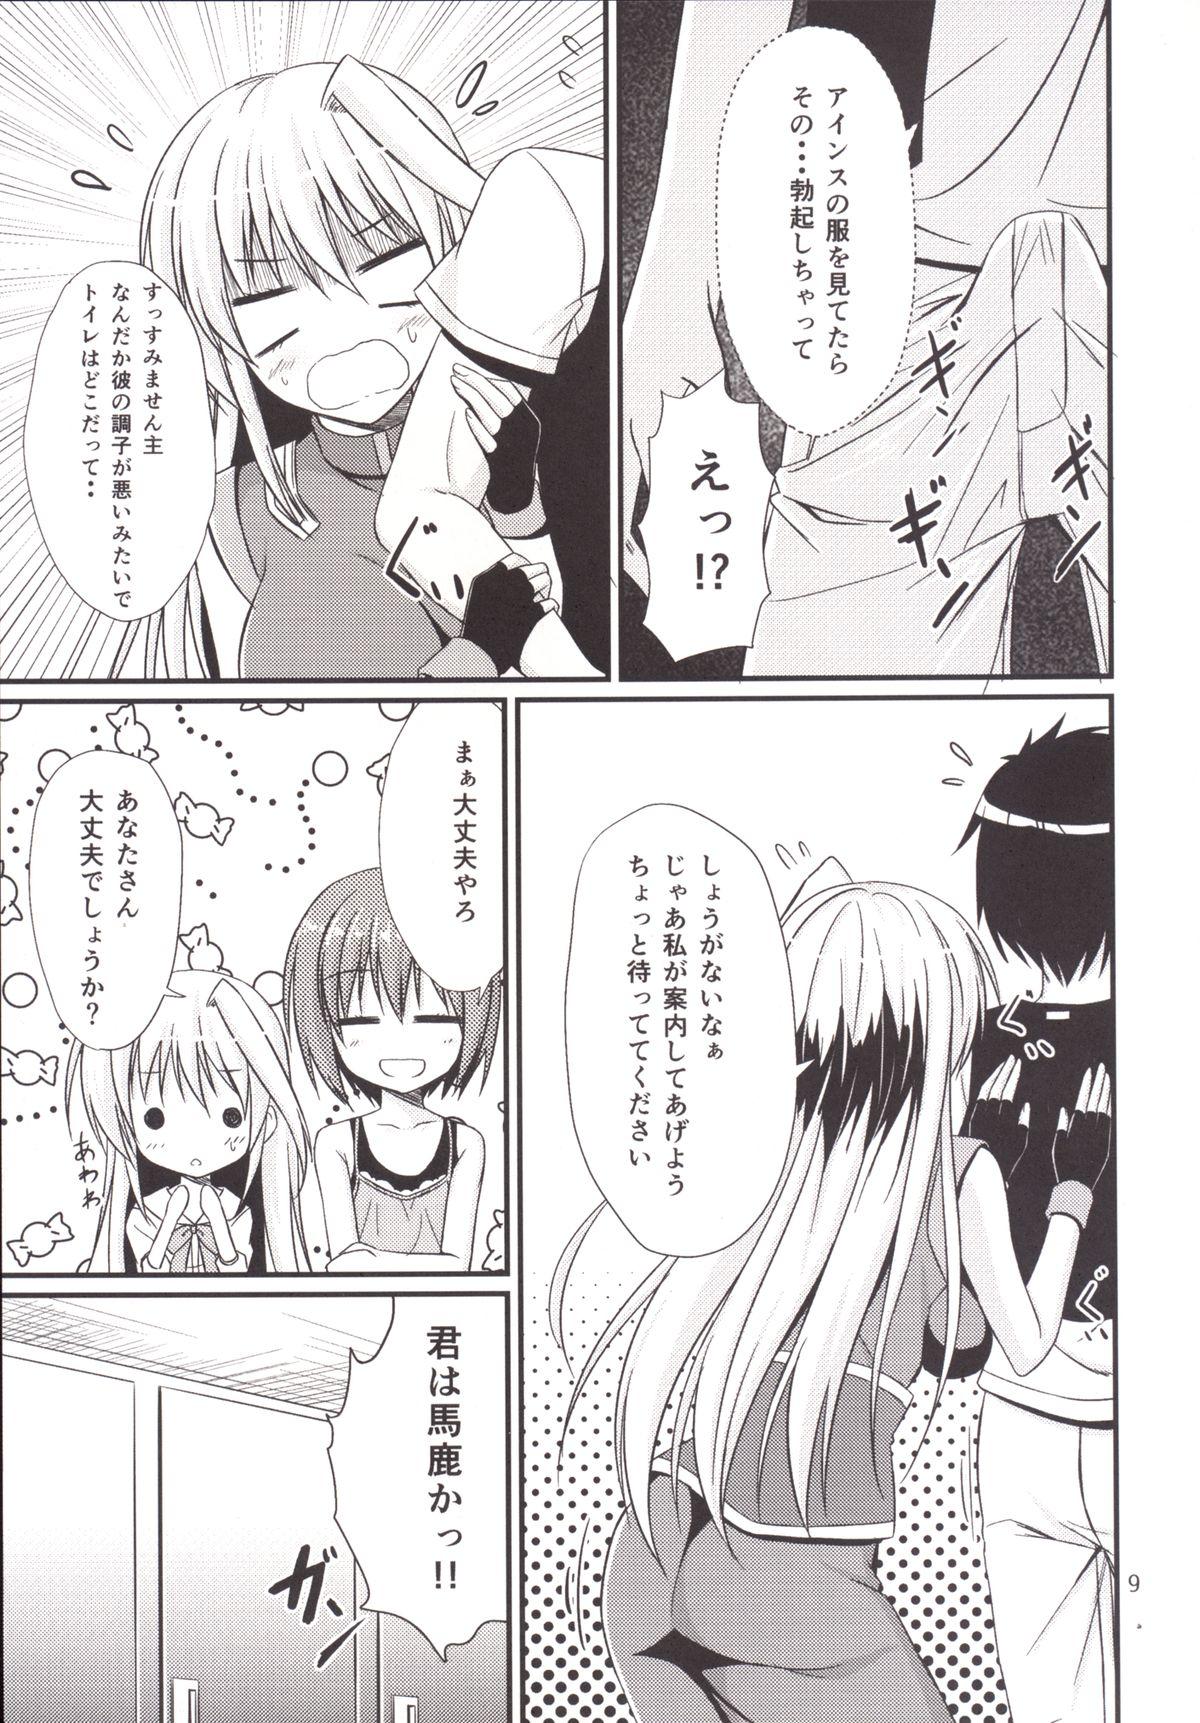 Freckles Eins to Issho! In Yagamido - Mahou shoujo lyrical nanoha France - Page 8